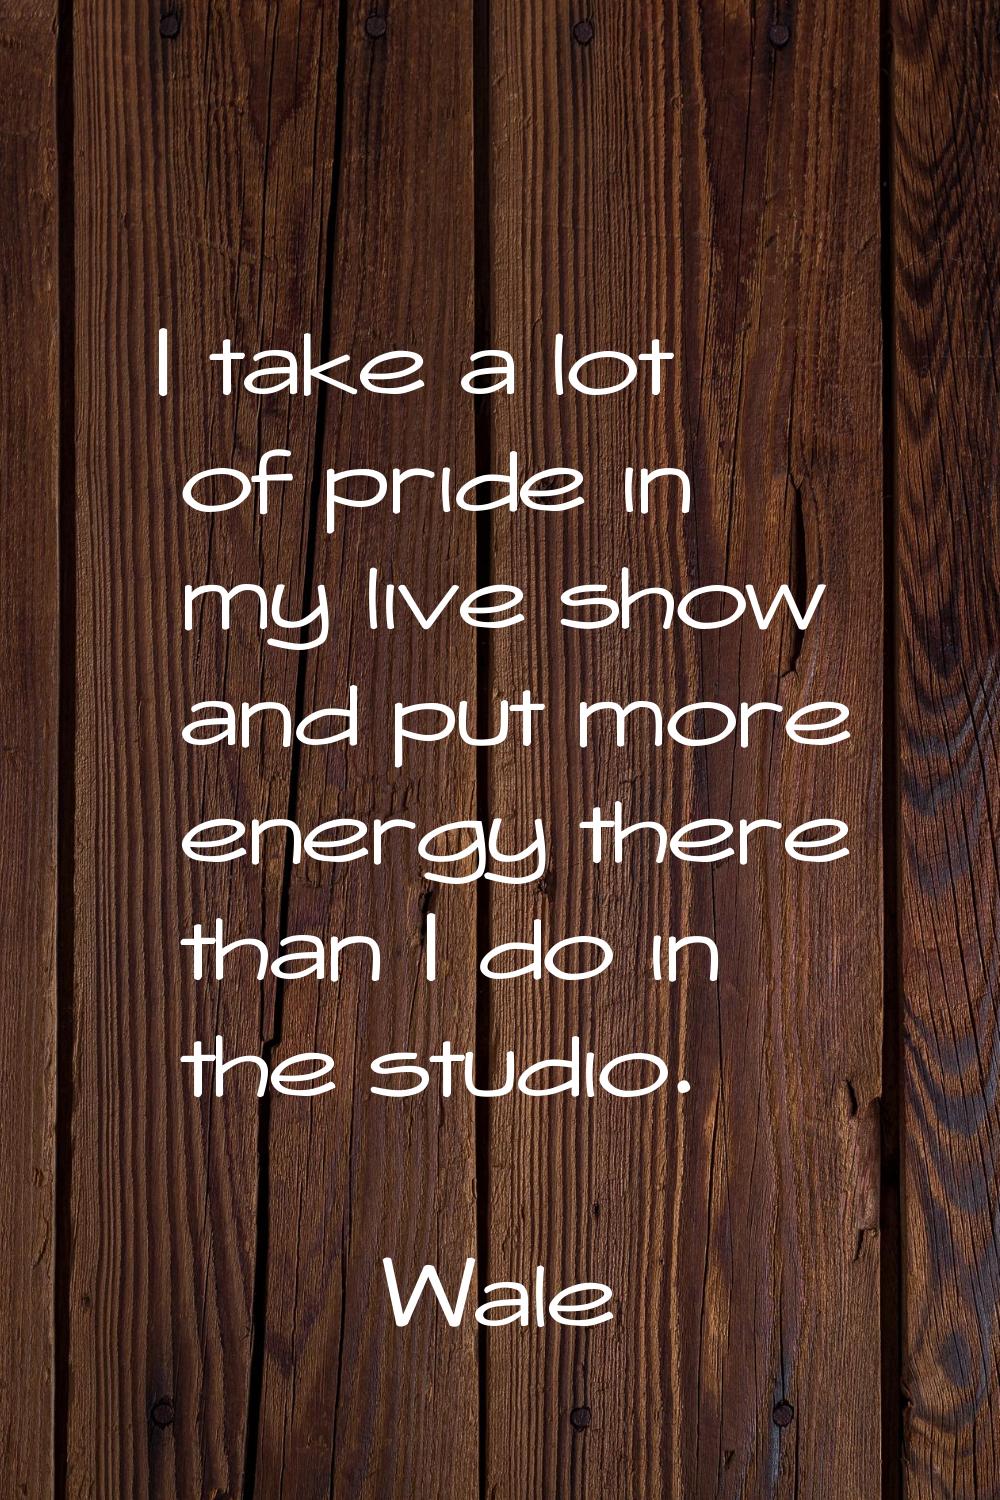 I take a lot of pride in my live show and put more energy there than I do in the studio.